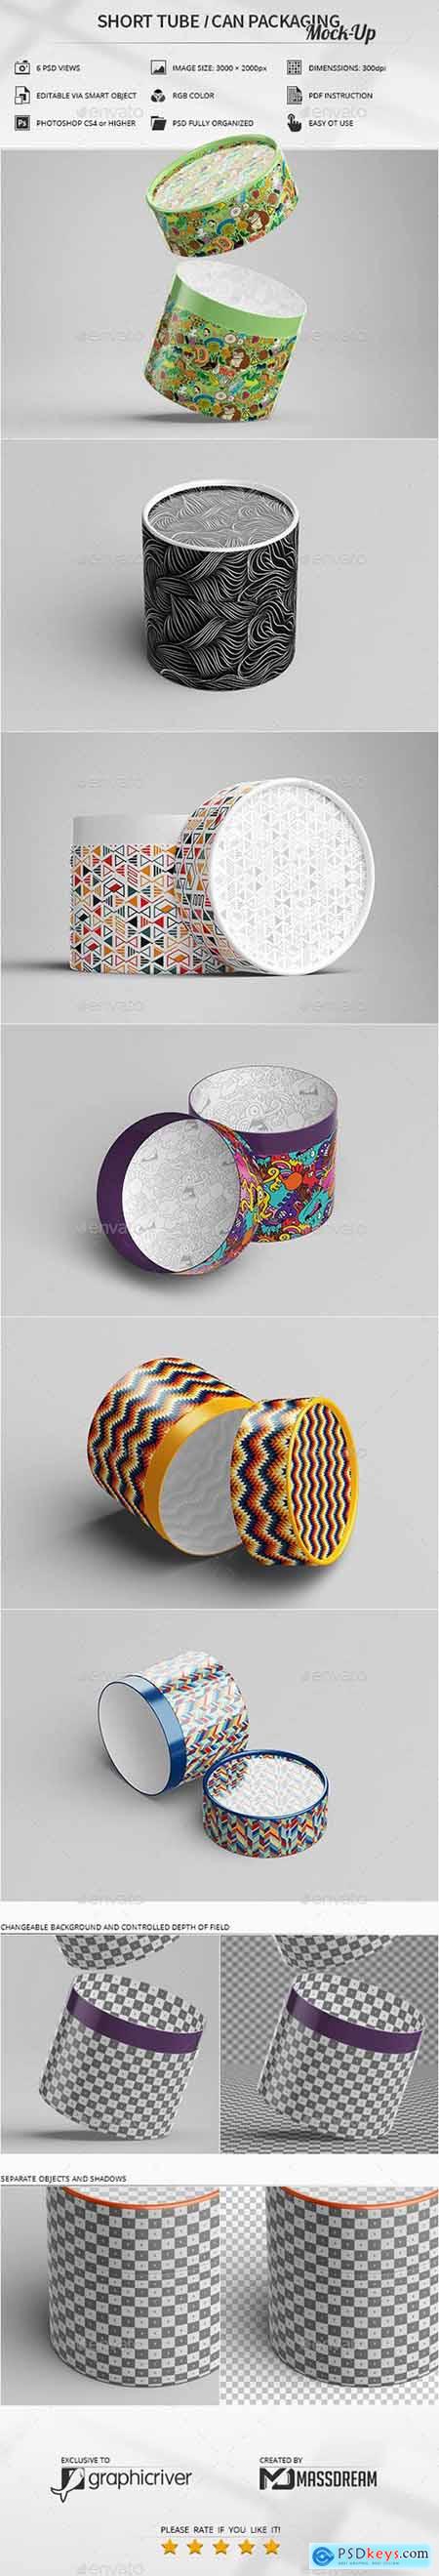 Graphicriver Short Tube Can Packaging Mock-Up